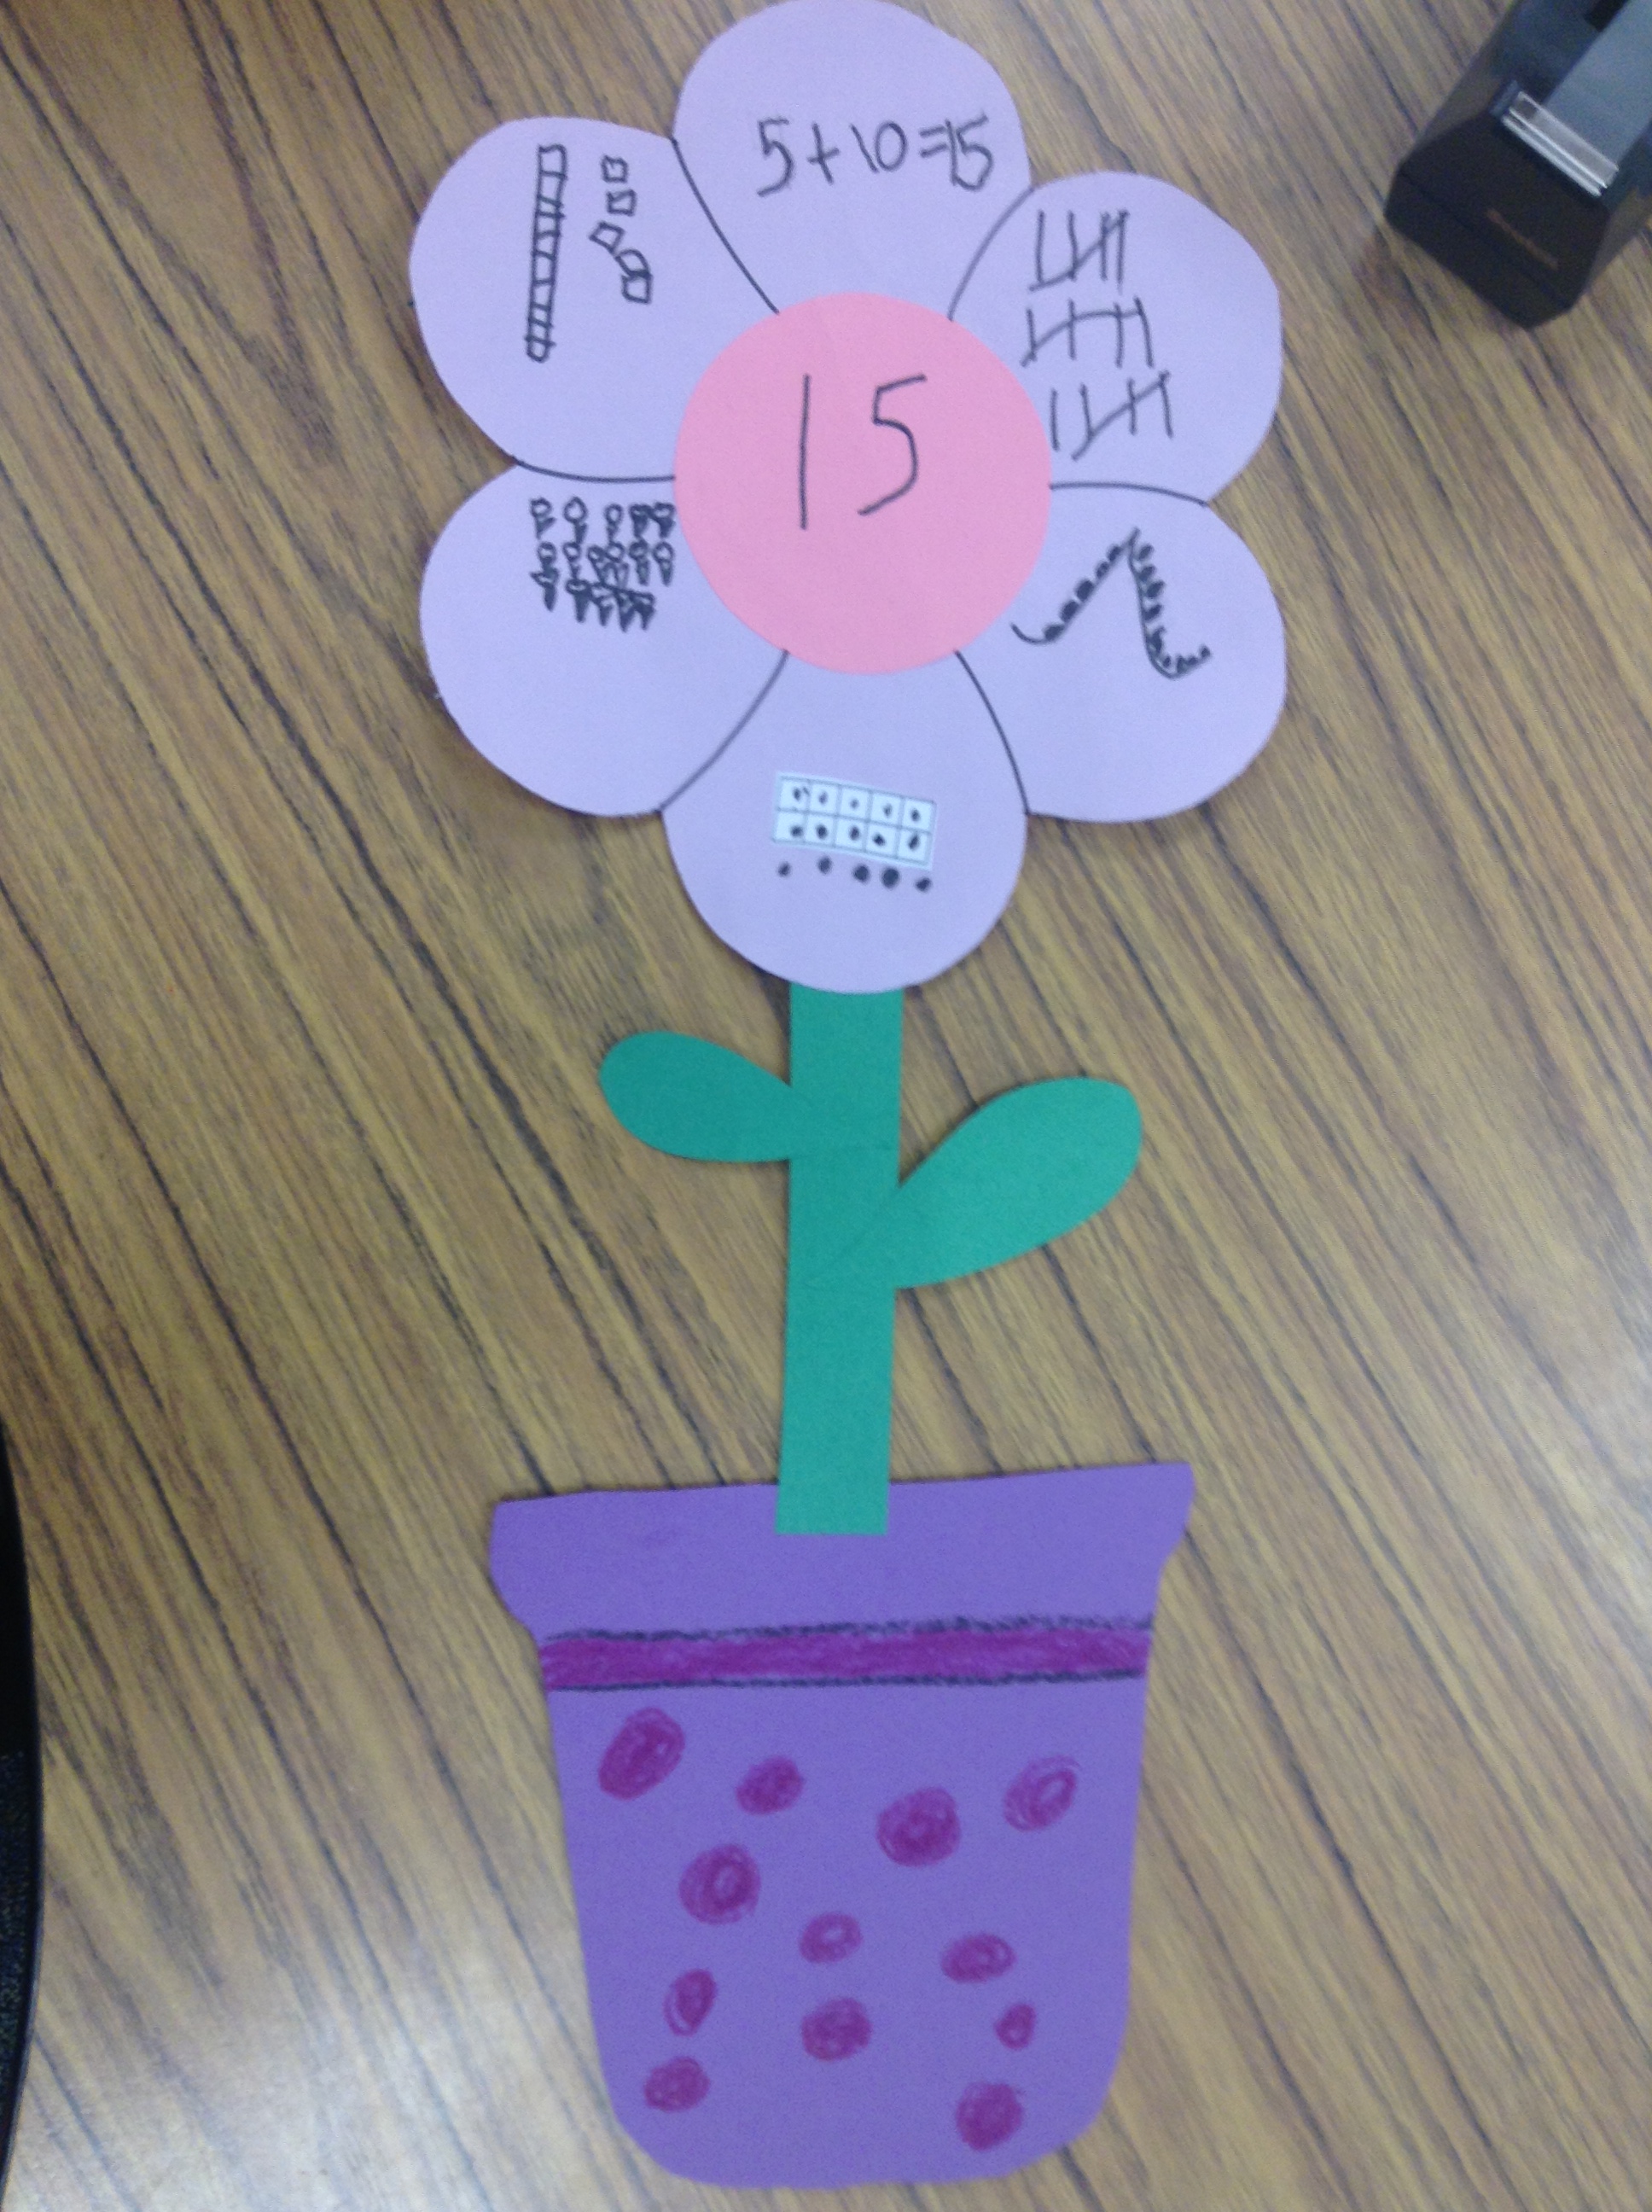 April Showers Bring Math Flowers! | Miss H's Student Teaching